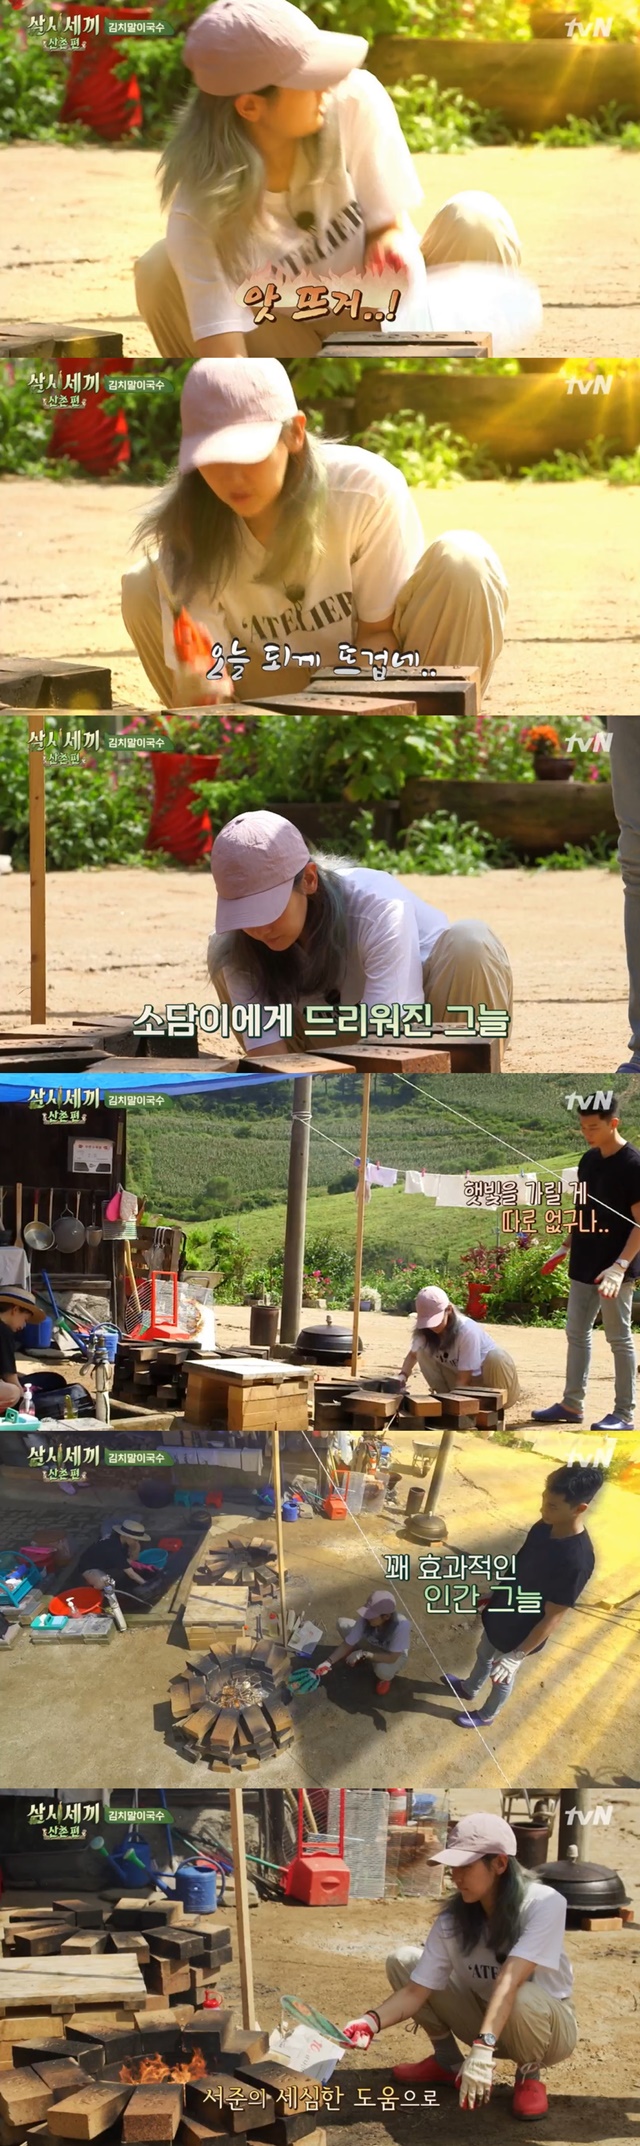 Park Seo-joon has shown a caring look.In the TVN Three Meals a Day Mountain Village broadcast on October 11, Actor Park Seo-joon transformed into a human the shade of the tent for Park So-dam, who is hot in the sun.On this day, Yeom Jeong-ah, Park So-dam and Yunsea prepared noodles for kimchi with lunch menu, followed by Park So-dam, who headed forward to set fire to life of noodles.han jung-won